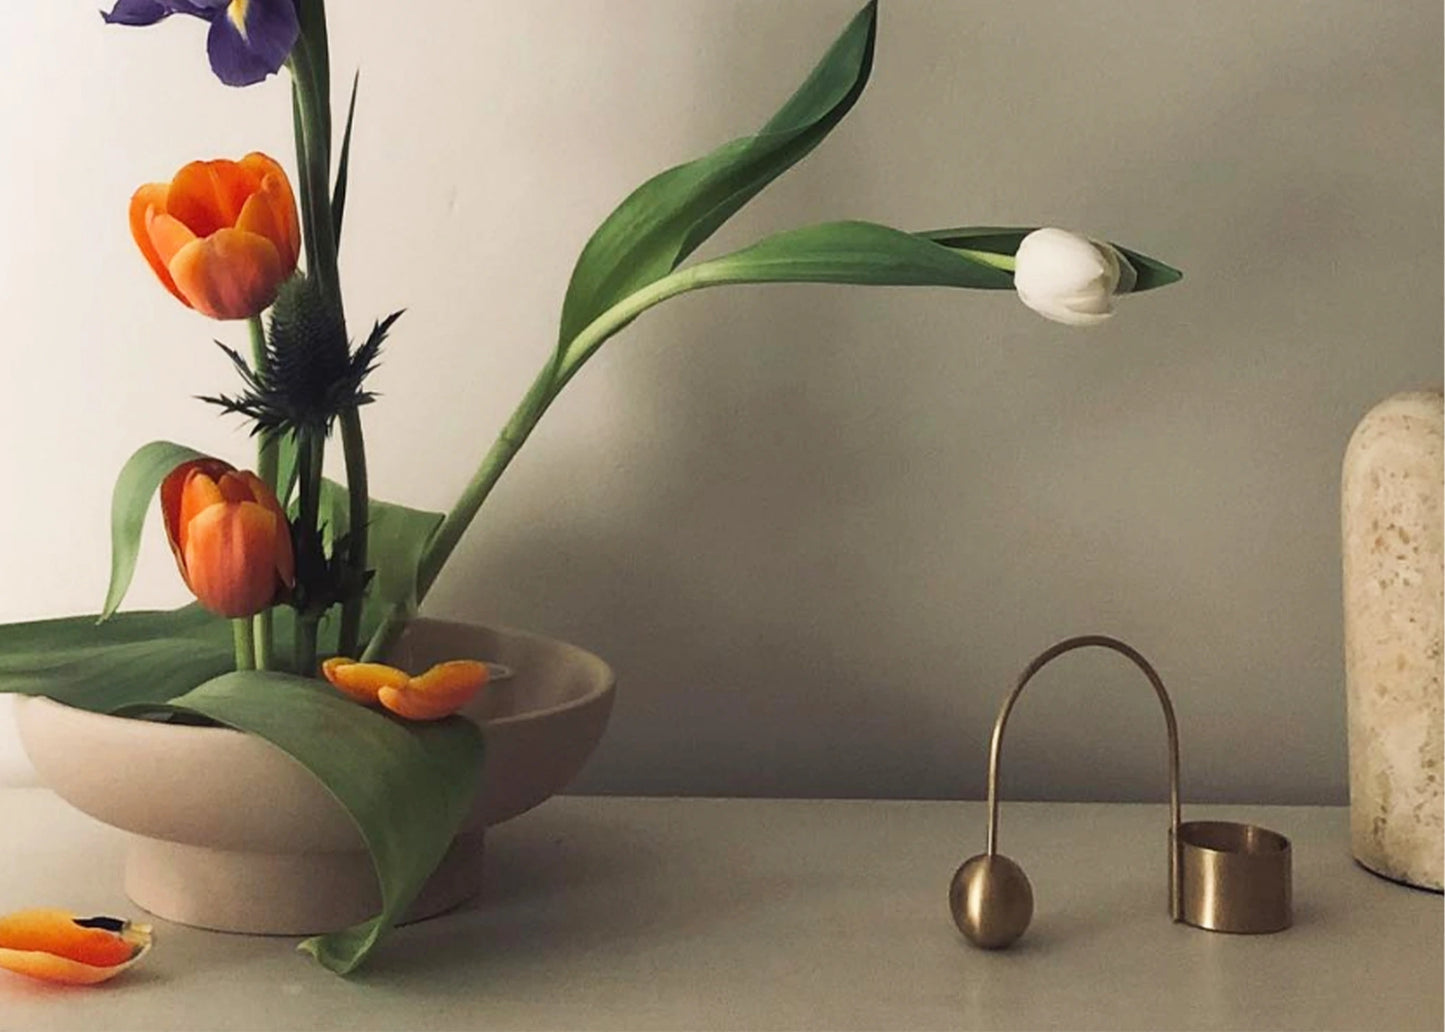 A brass balance tealight holder on a table next to a bouquet of flowers in a bowl.